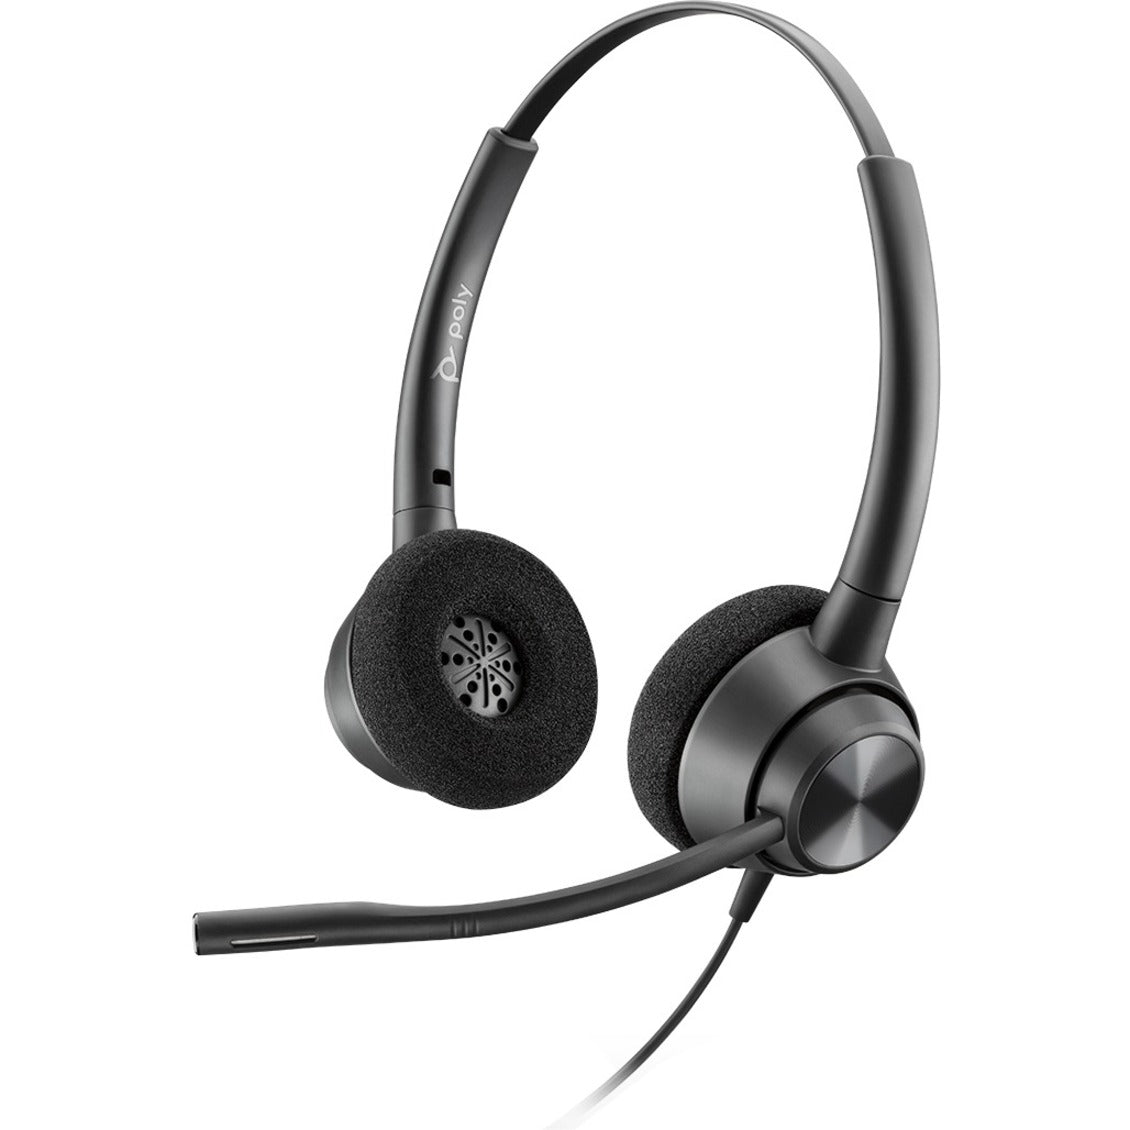 Plantronics 214573-01 EncorePro 320 QD Headset, Binaural Over-the-head, Noise Cancelling, Stereo